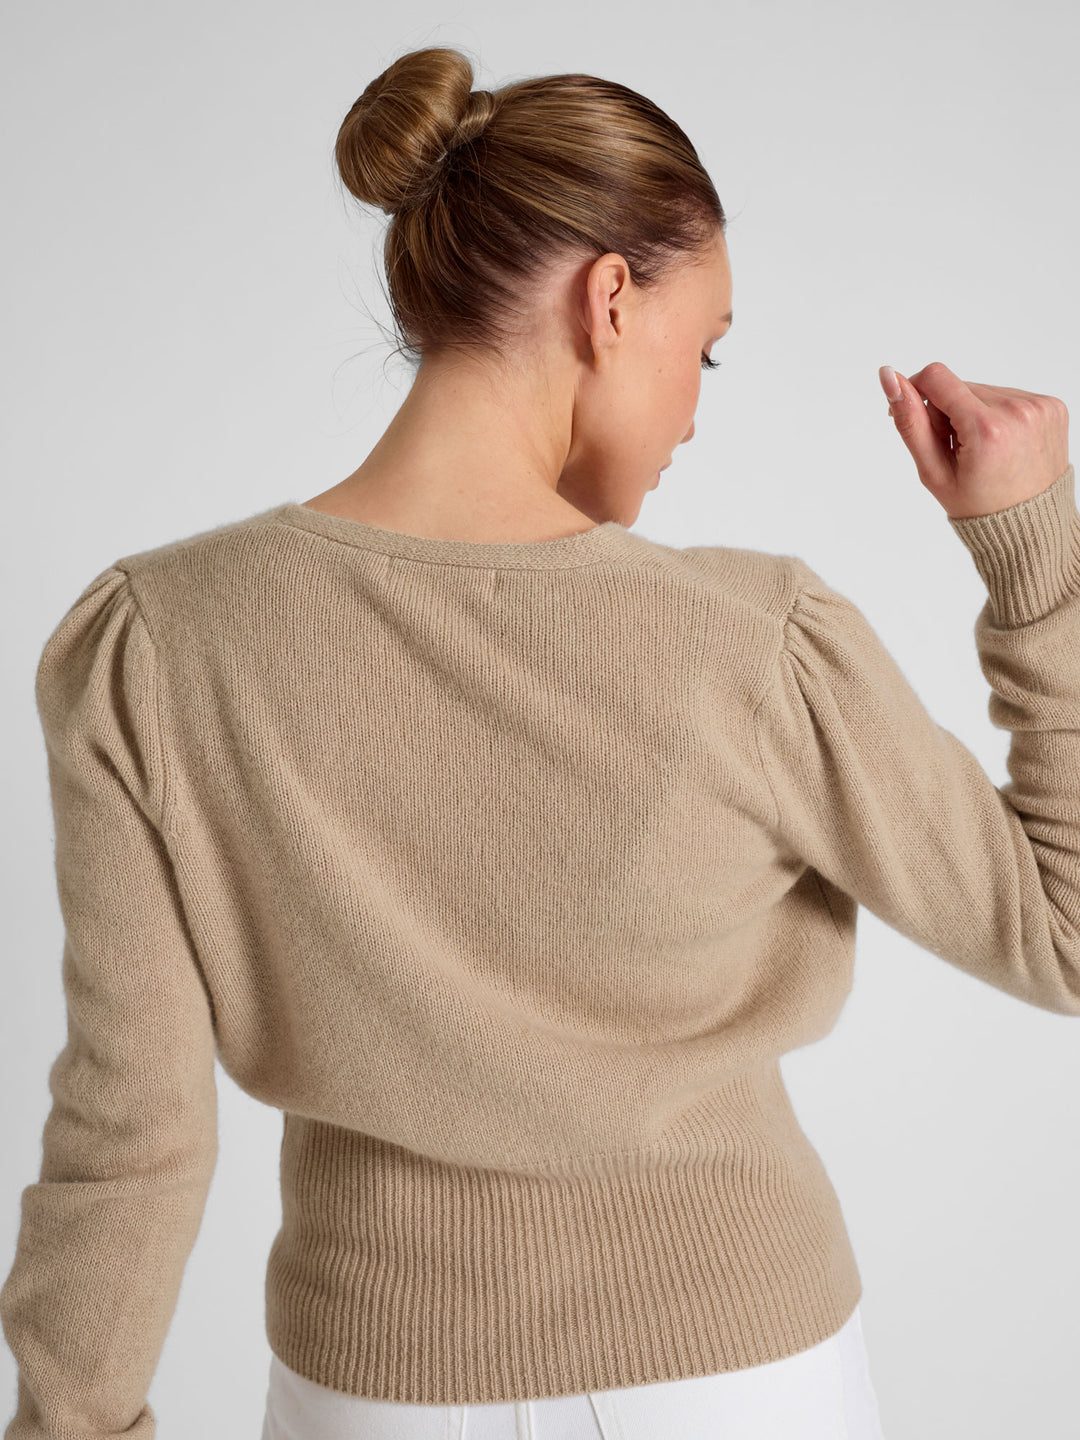 Cashmere cardigan puff sleeves, long sleeves, 100% pure cashmere, Scandinavian design, color: Sand.